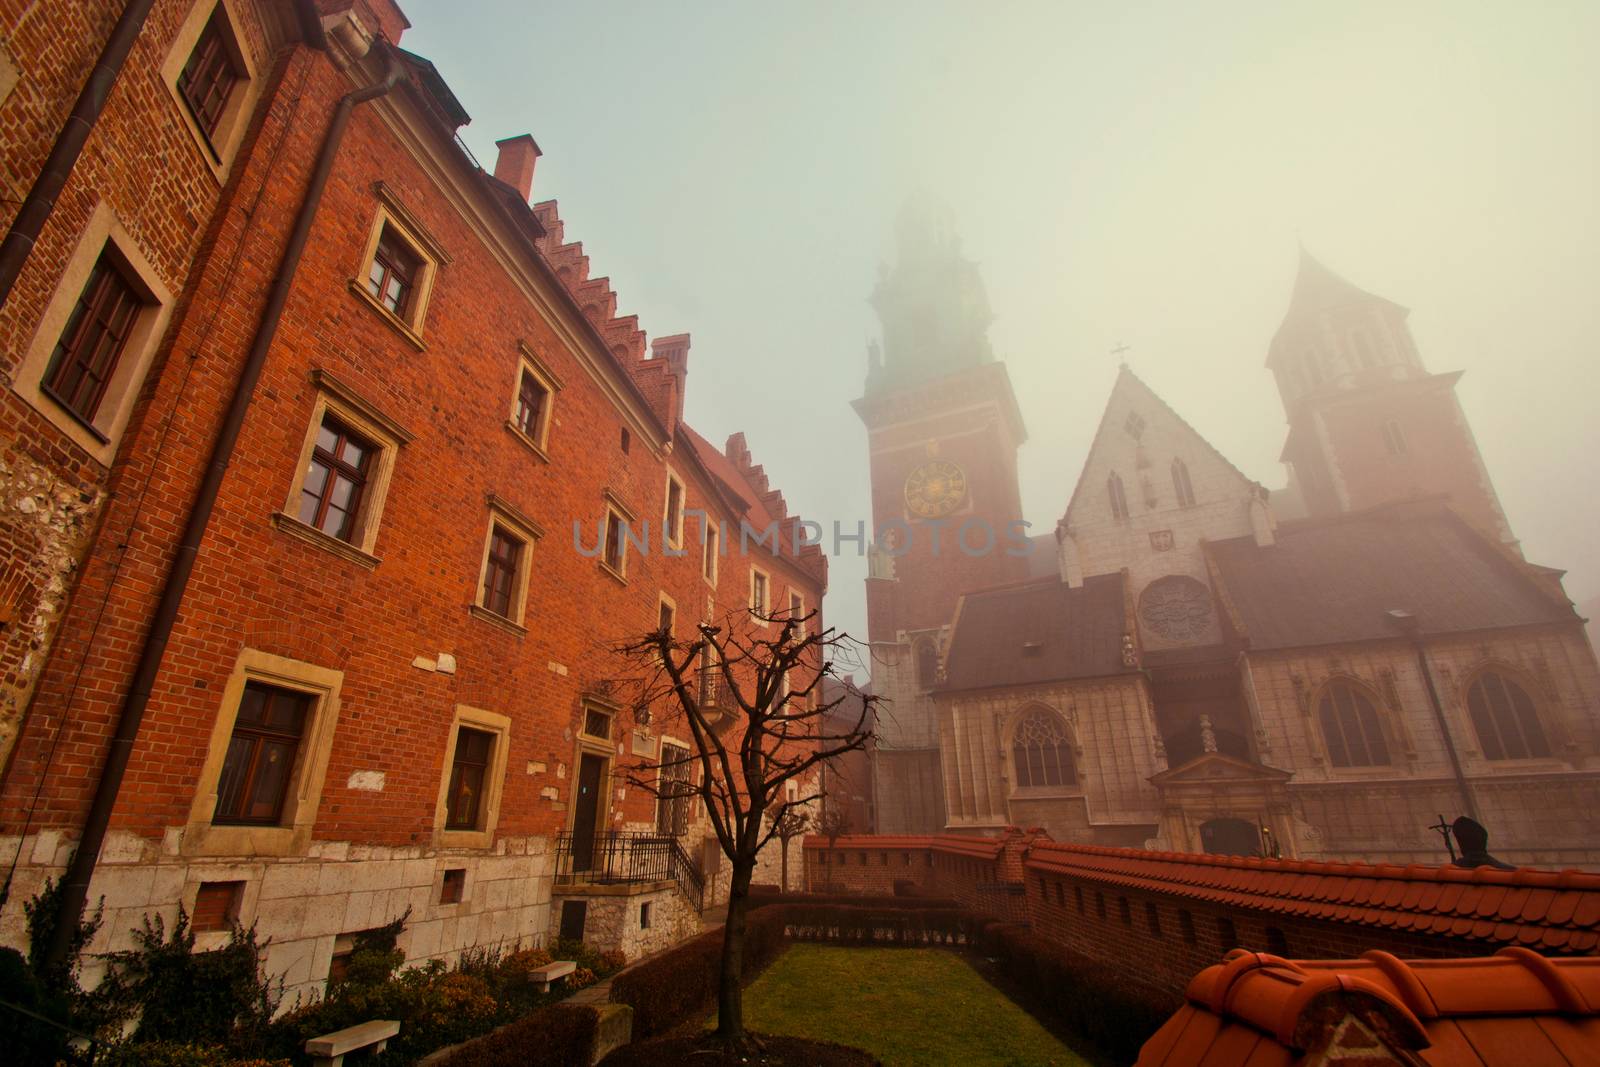 Church in the fog. The Royal Archcathedral Basilica of Saints Stanislaus and Wenceslaus on Wawel, Craców, Poland.